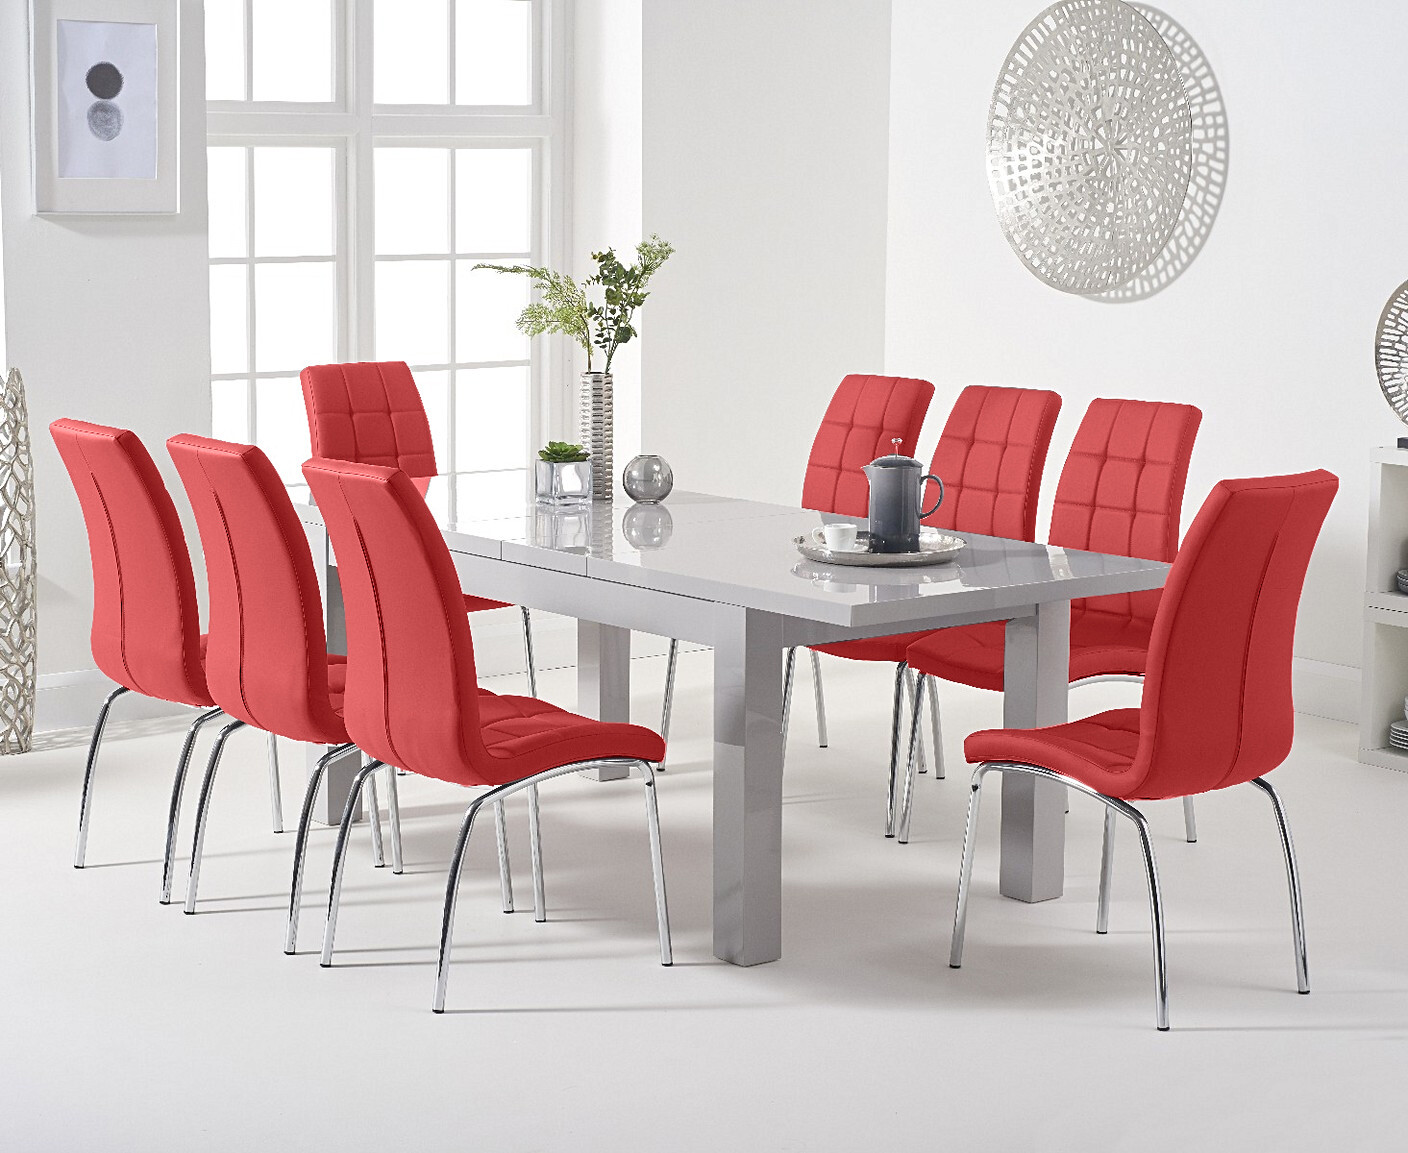 Extending Seattle 160cm Light Grey High Gloss Dining Table With 6 Cream Enzo Chairs